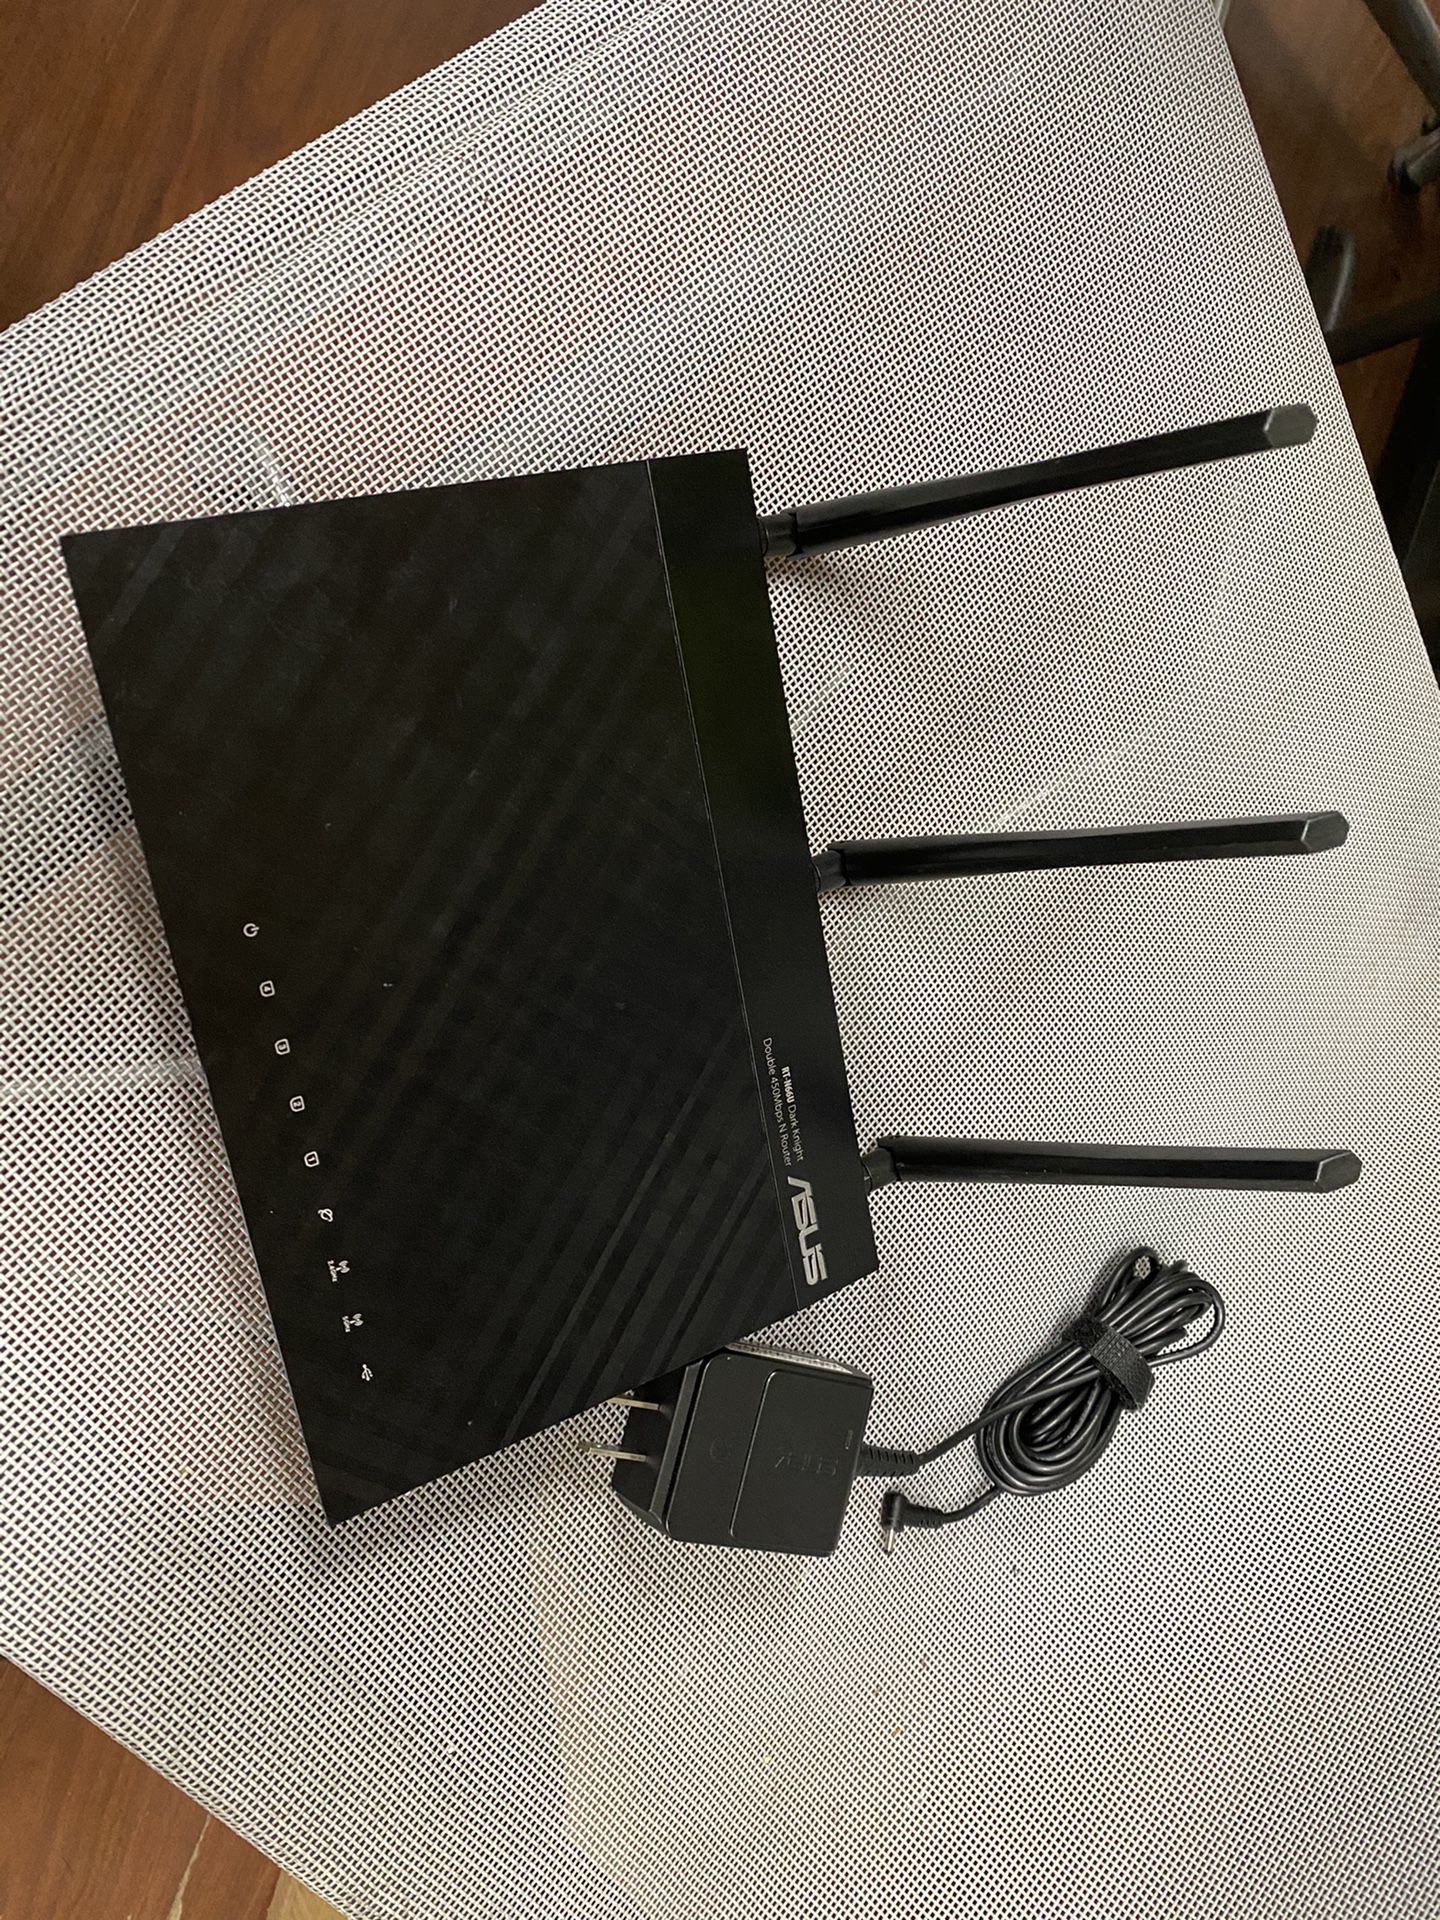 Asus RT-N66U Dual Band WiFi Router